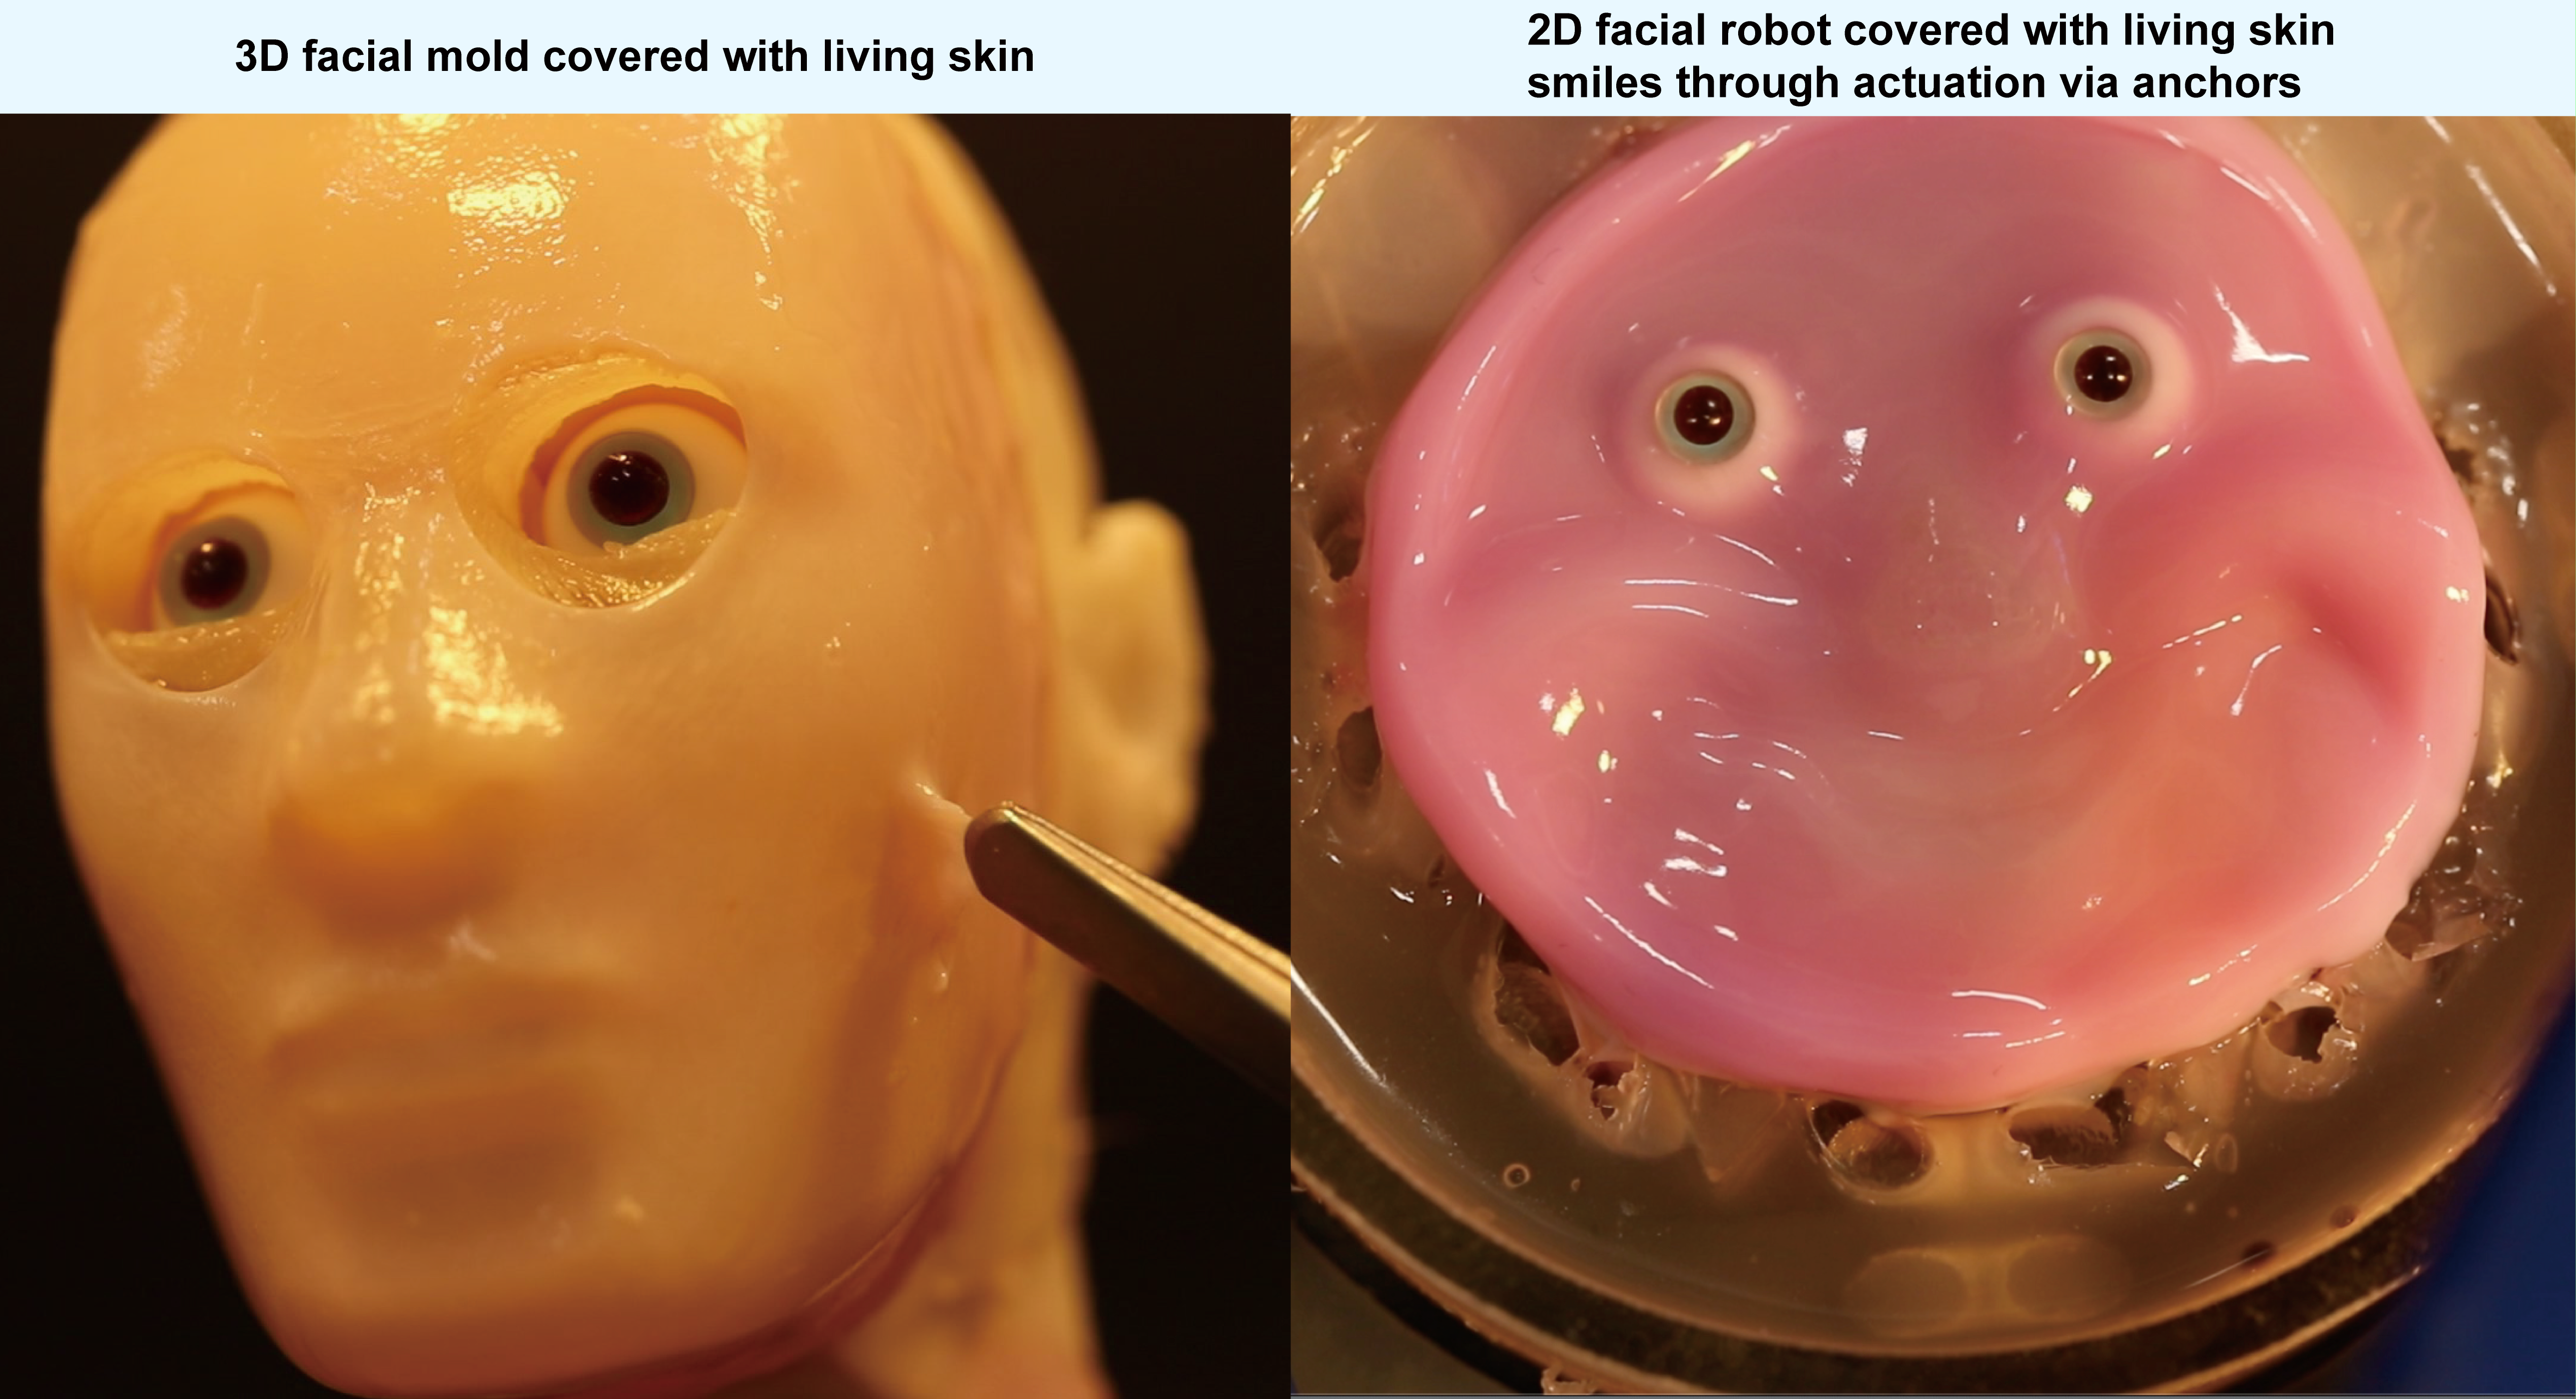 Humanoid faces with living skin